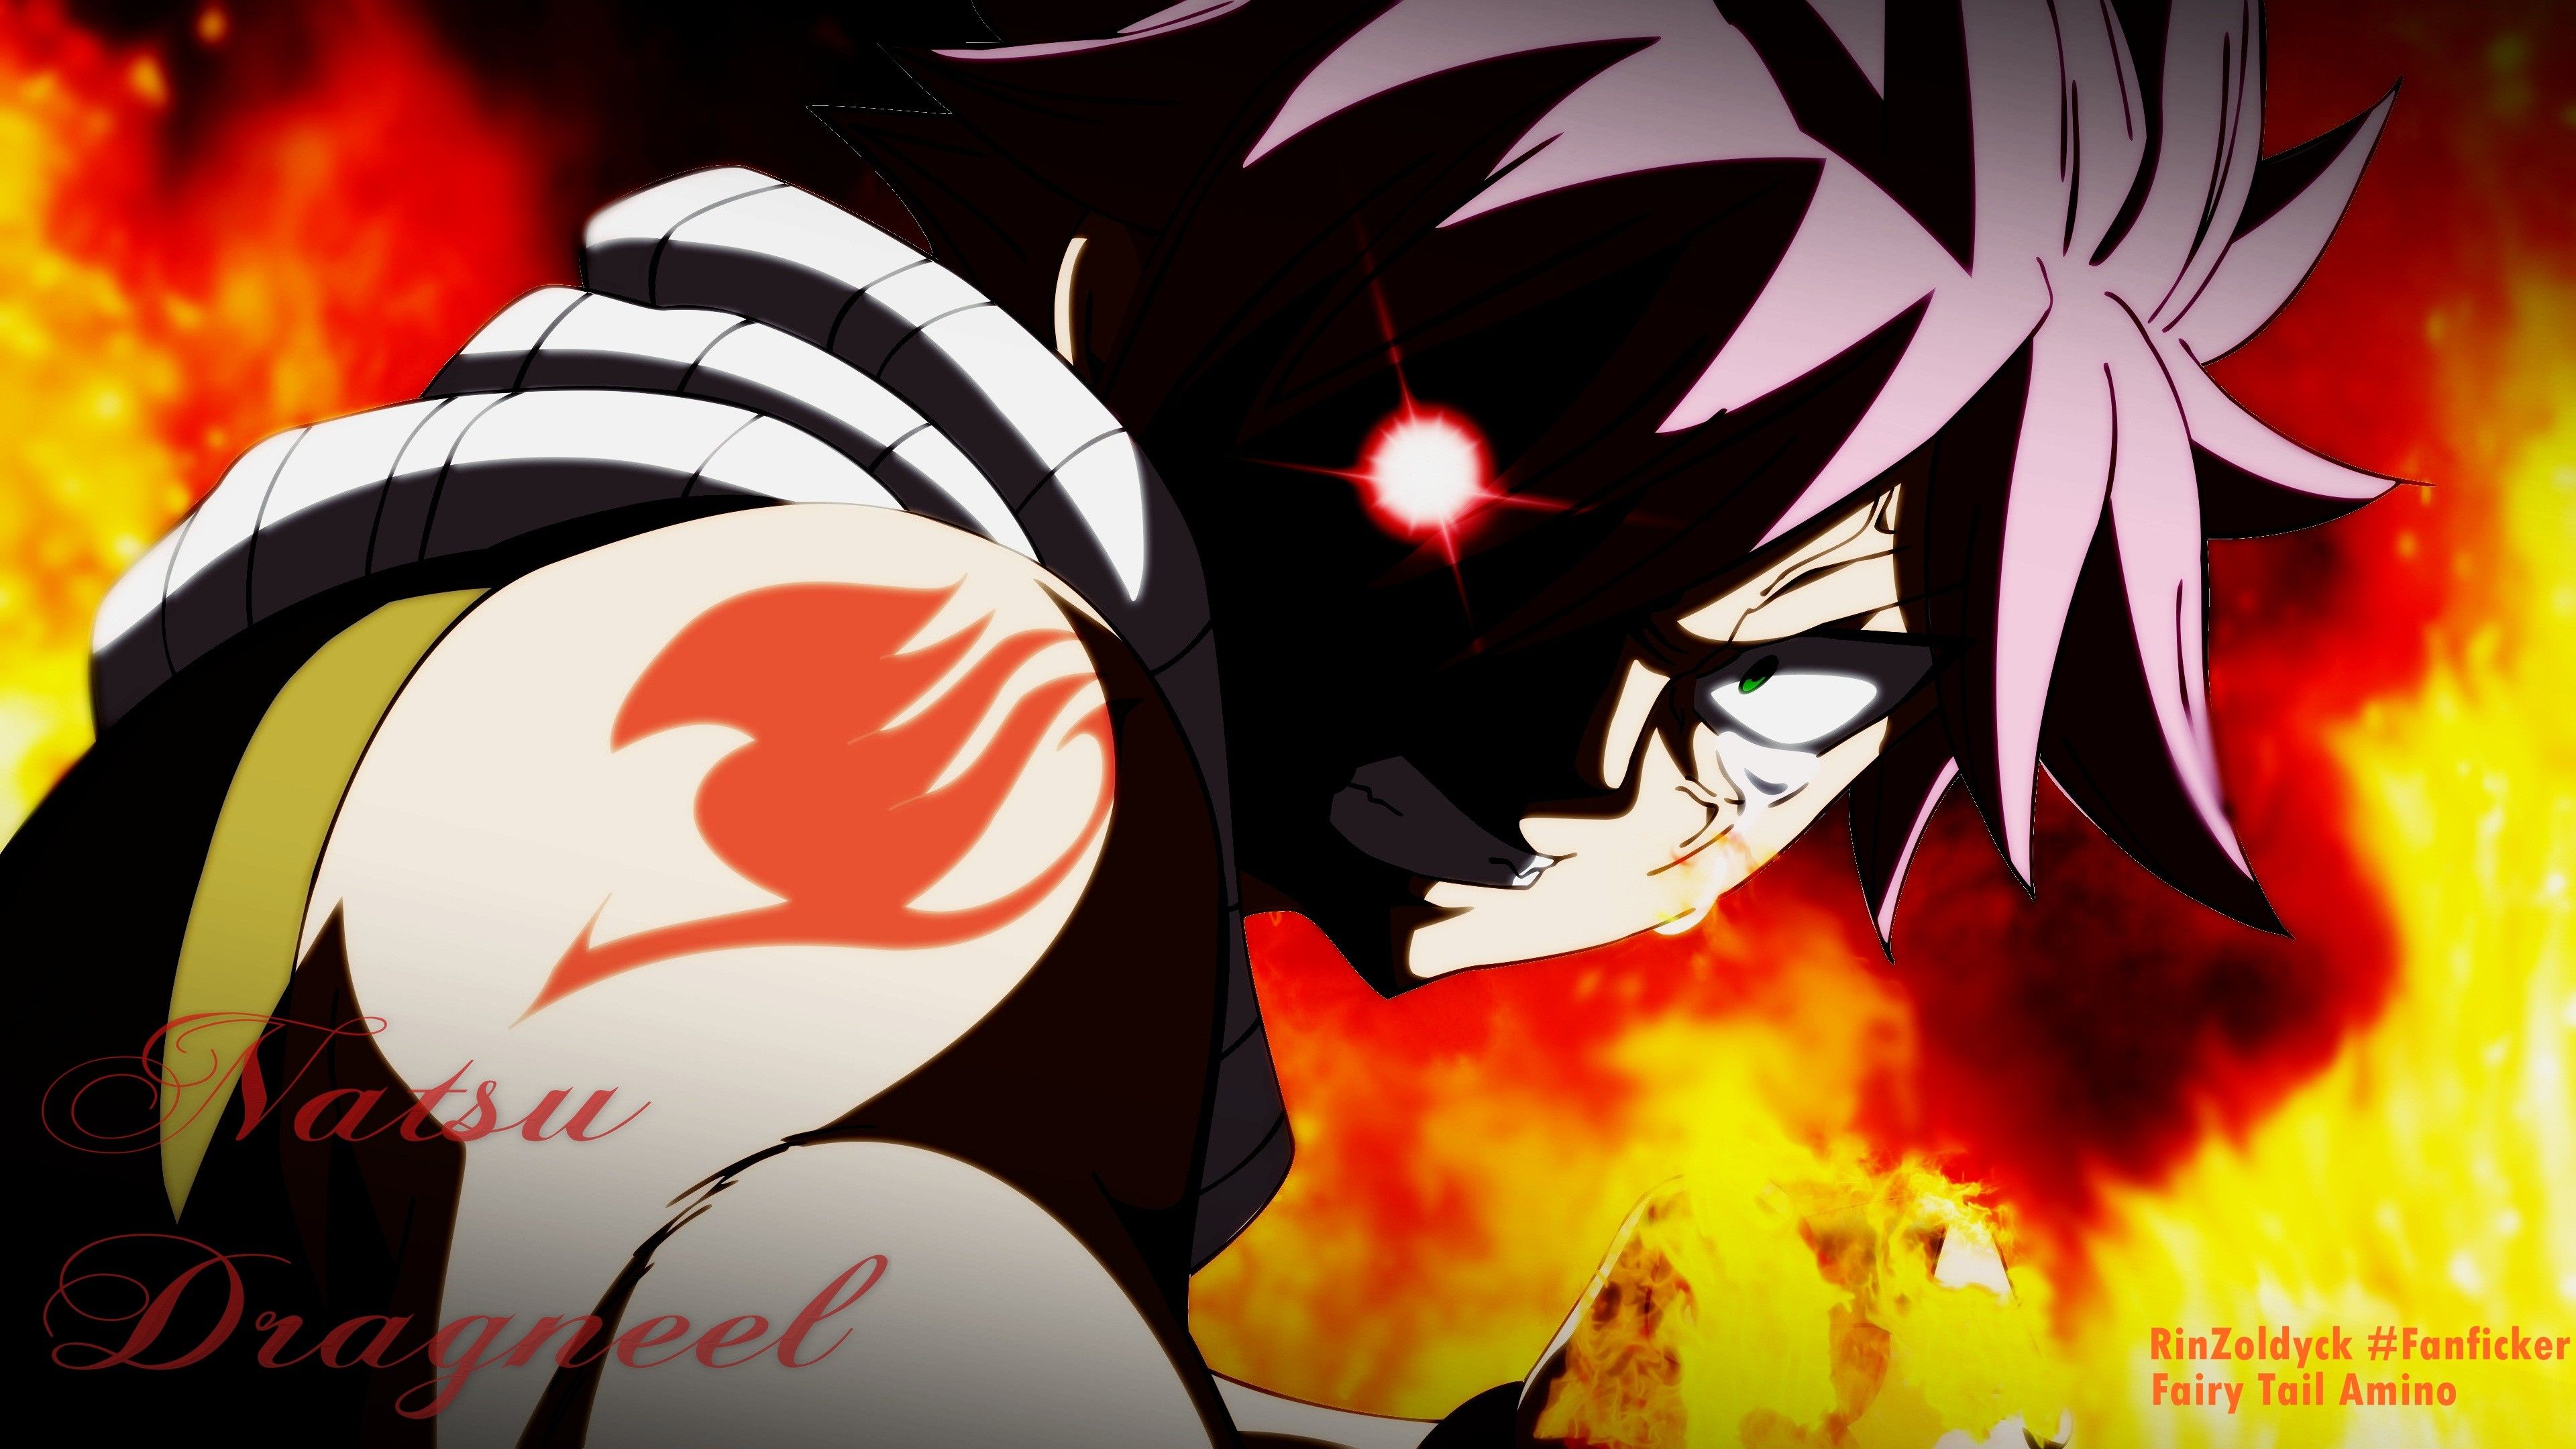 Natsu Dragneel - Fairy Tail wallpaper - Anime wallpapers - #26497